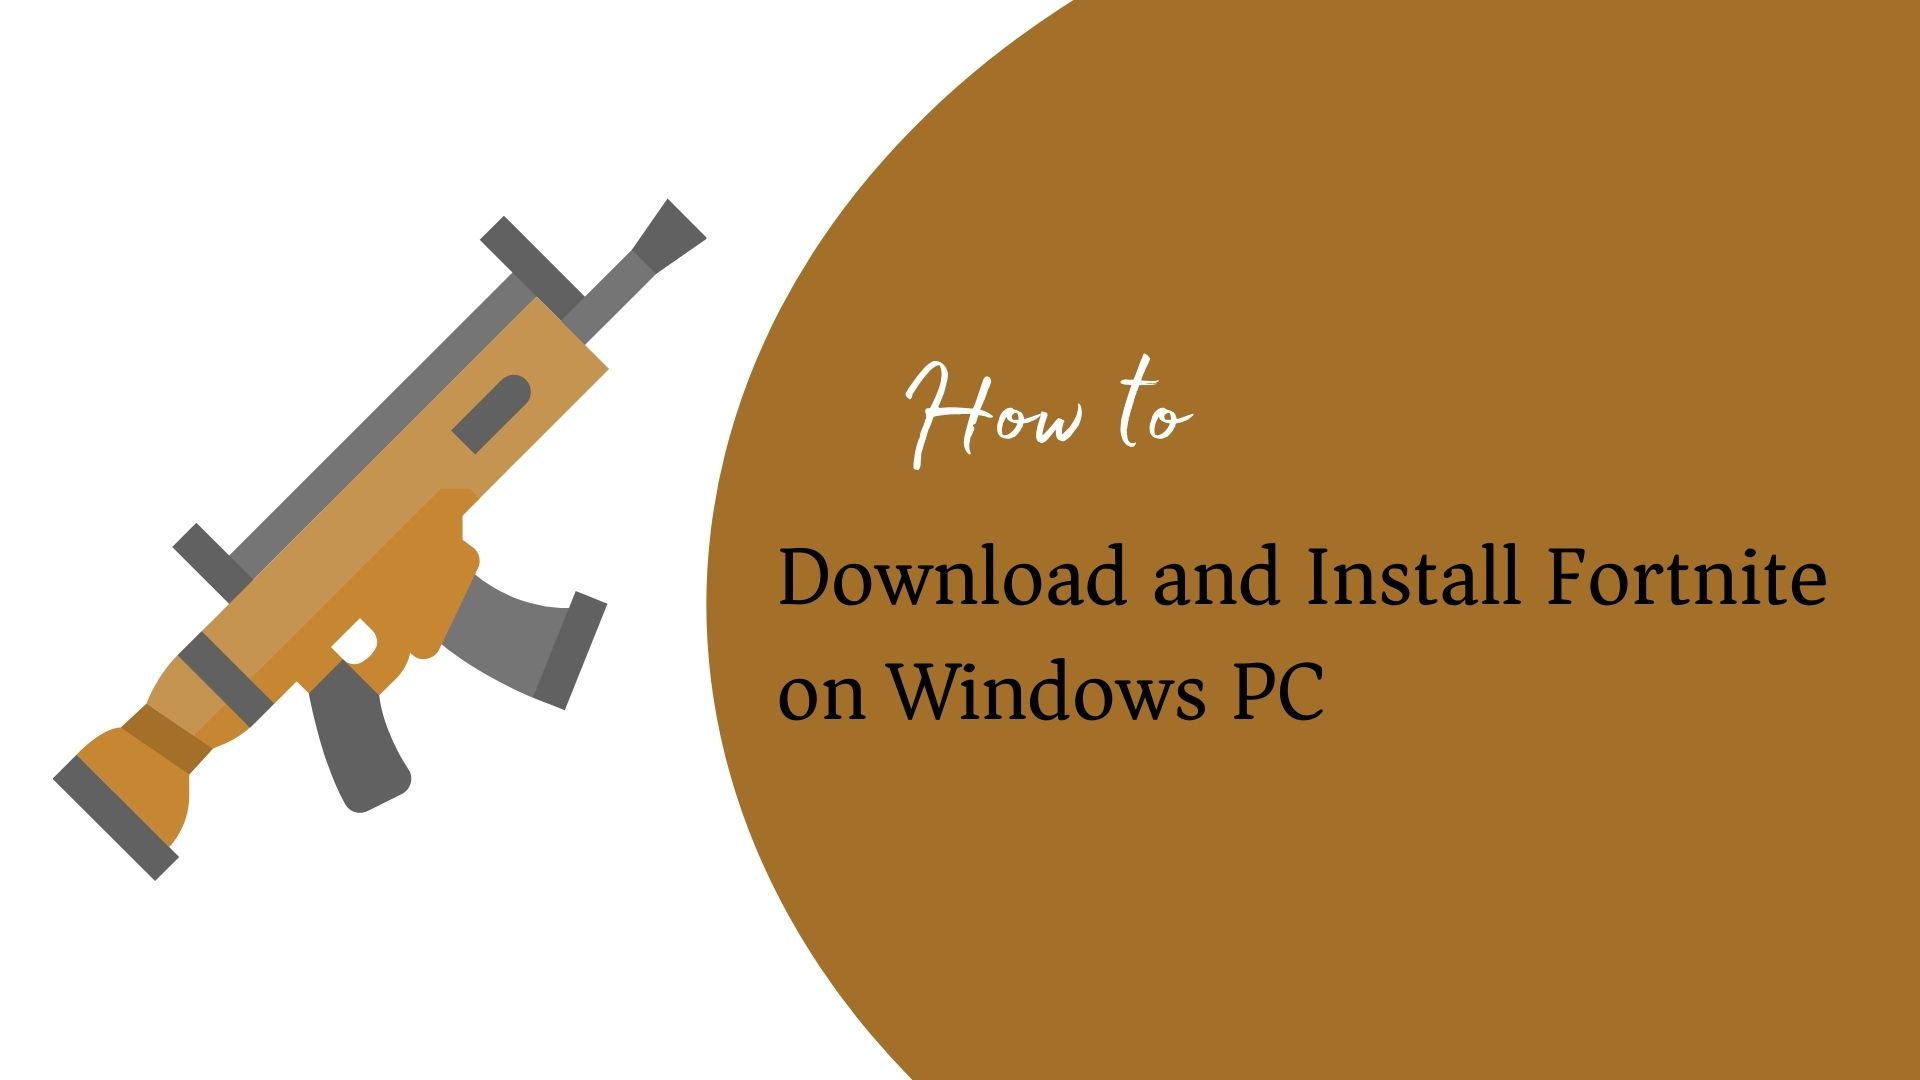 How to Download and Install Fortnite on Windows PC